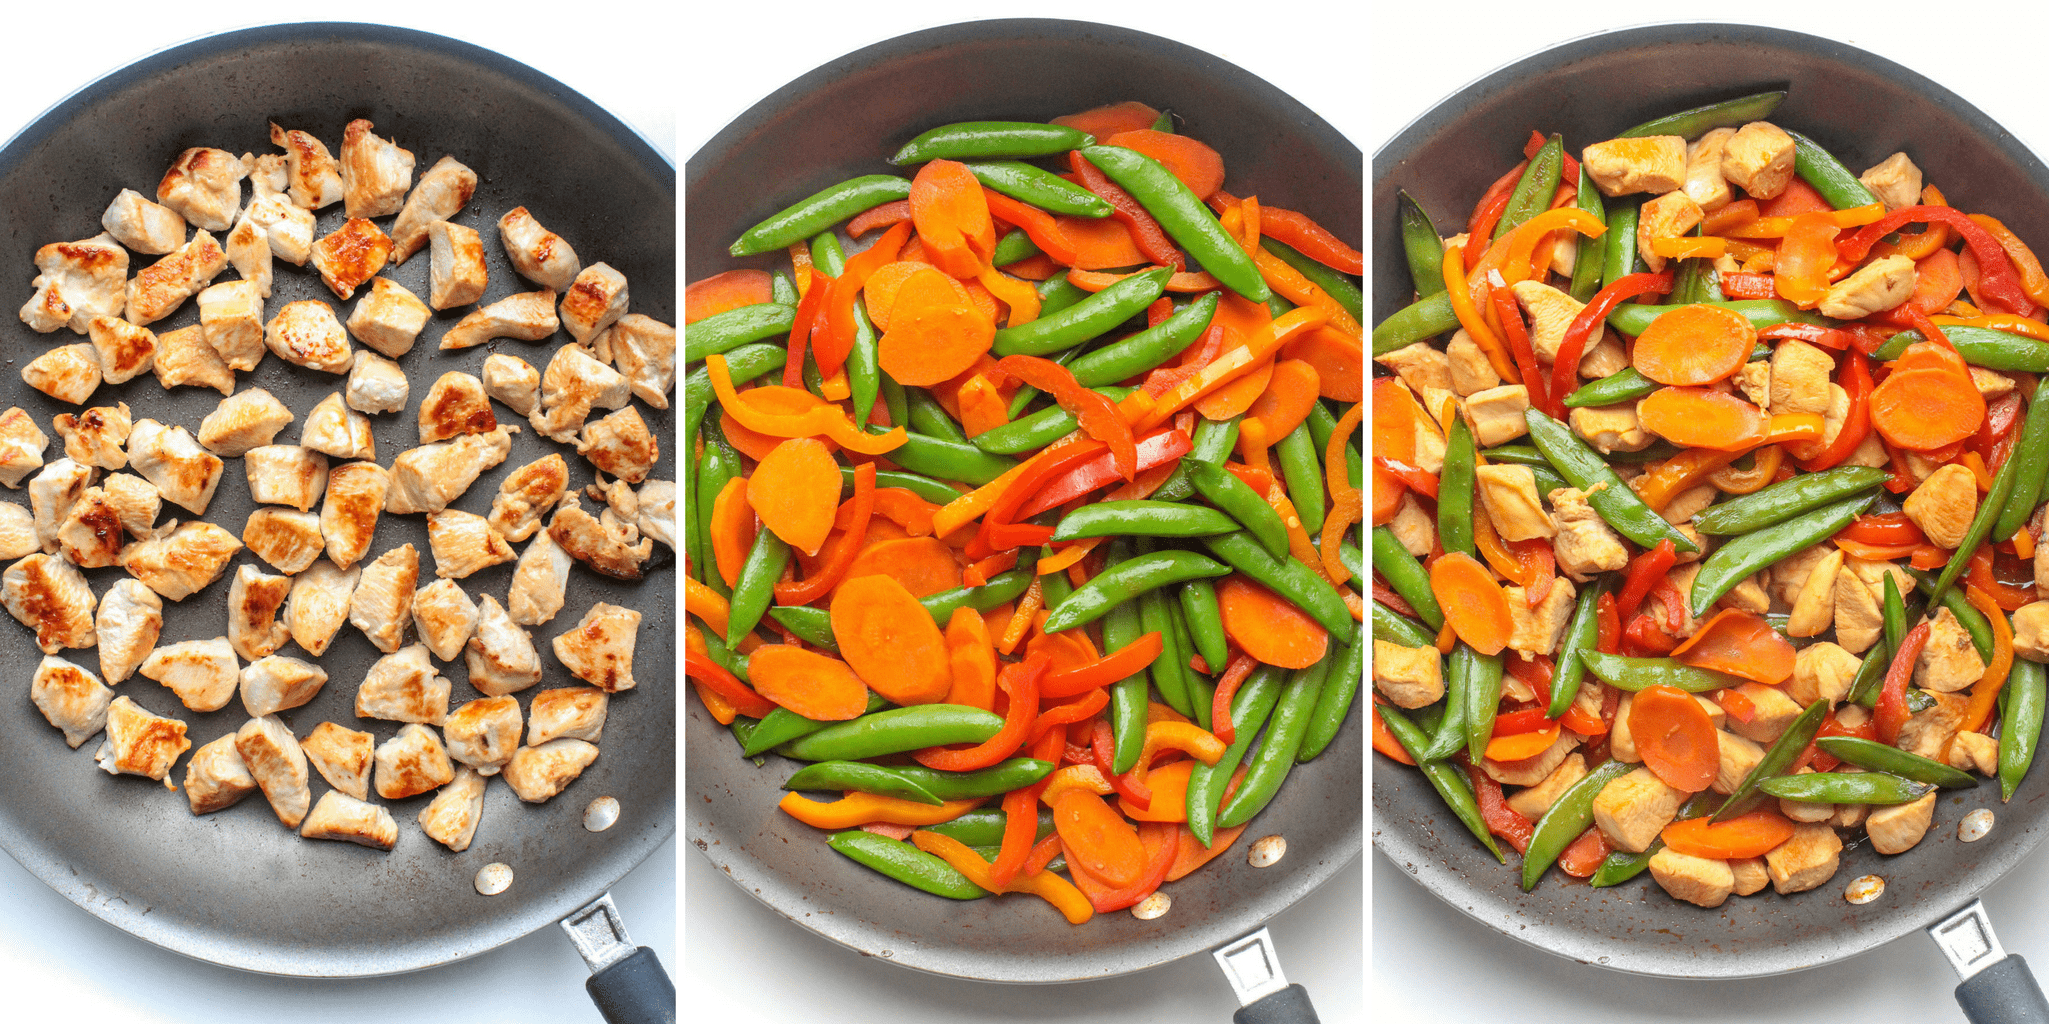 skillet with chicken and vegetables for stir fry